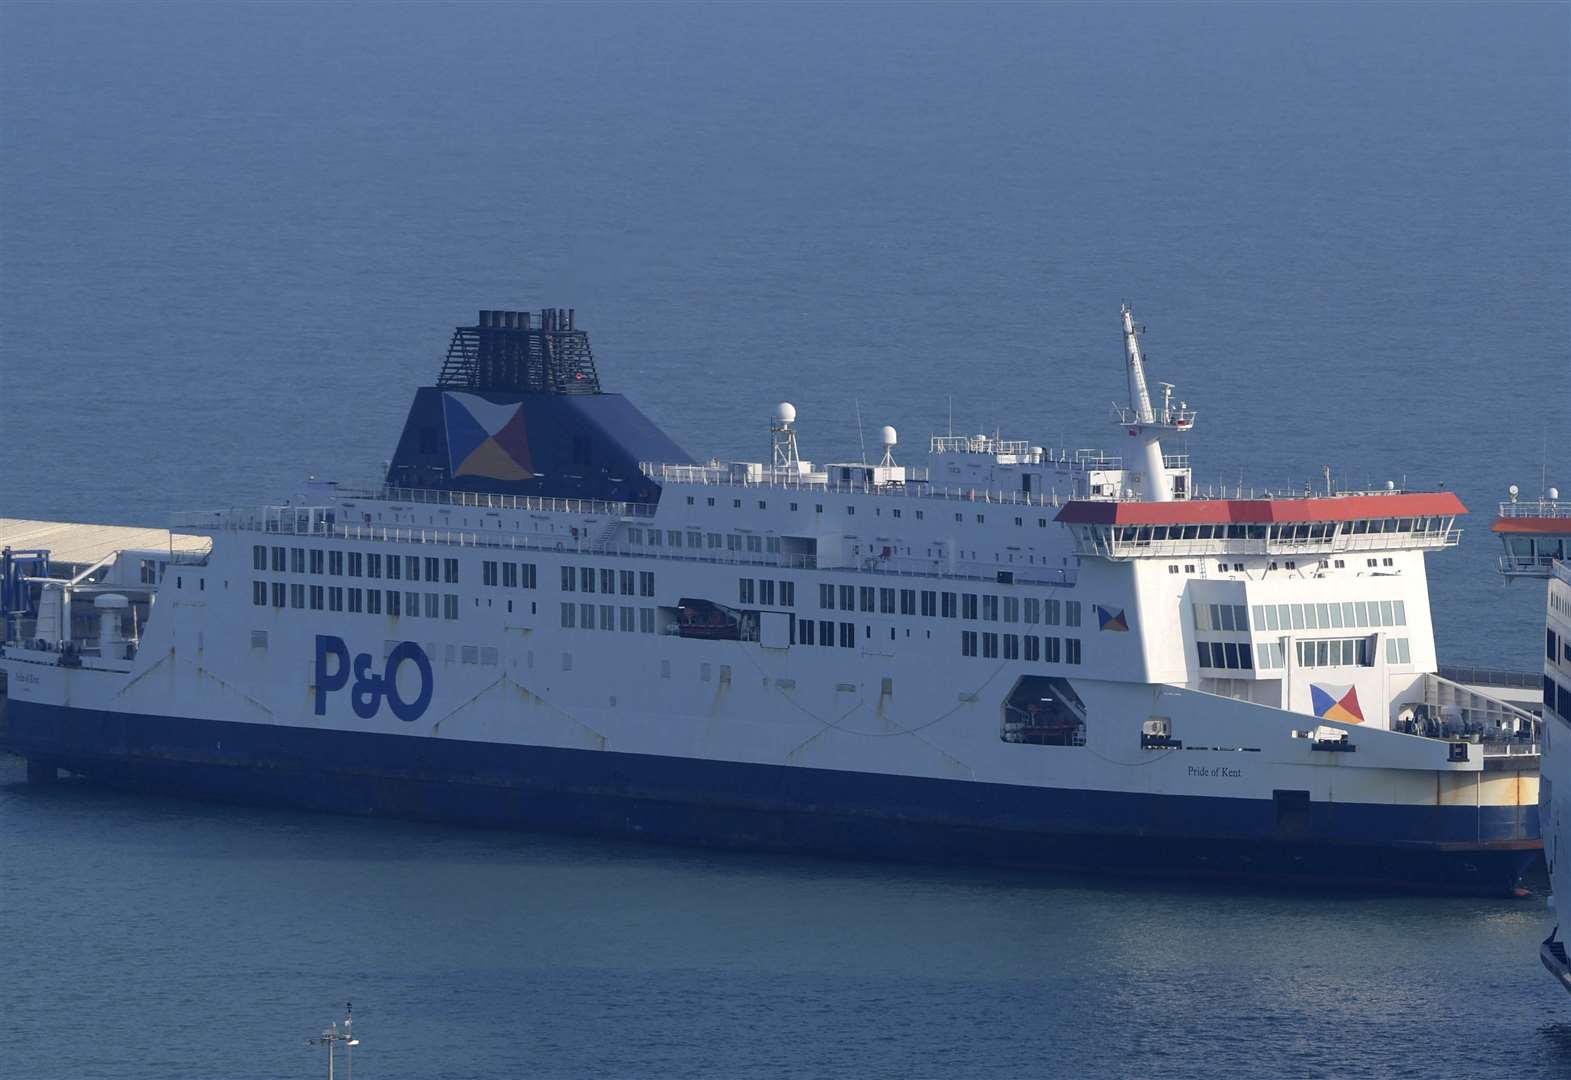 P&O ferry's rescue boats didn't work